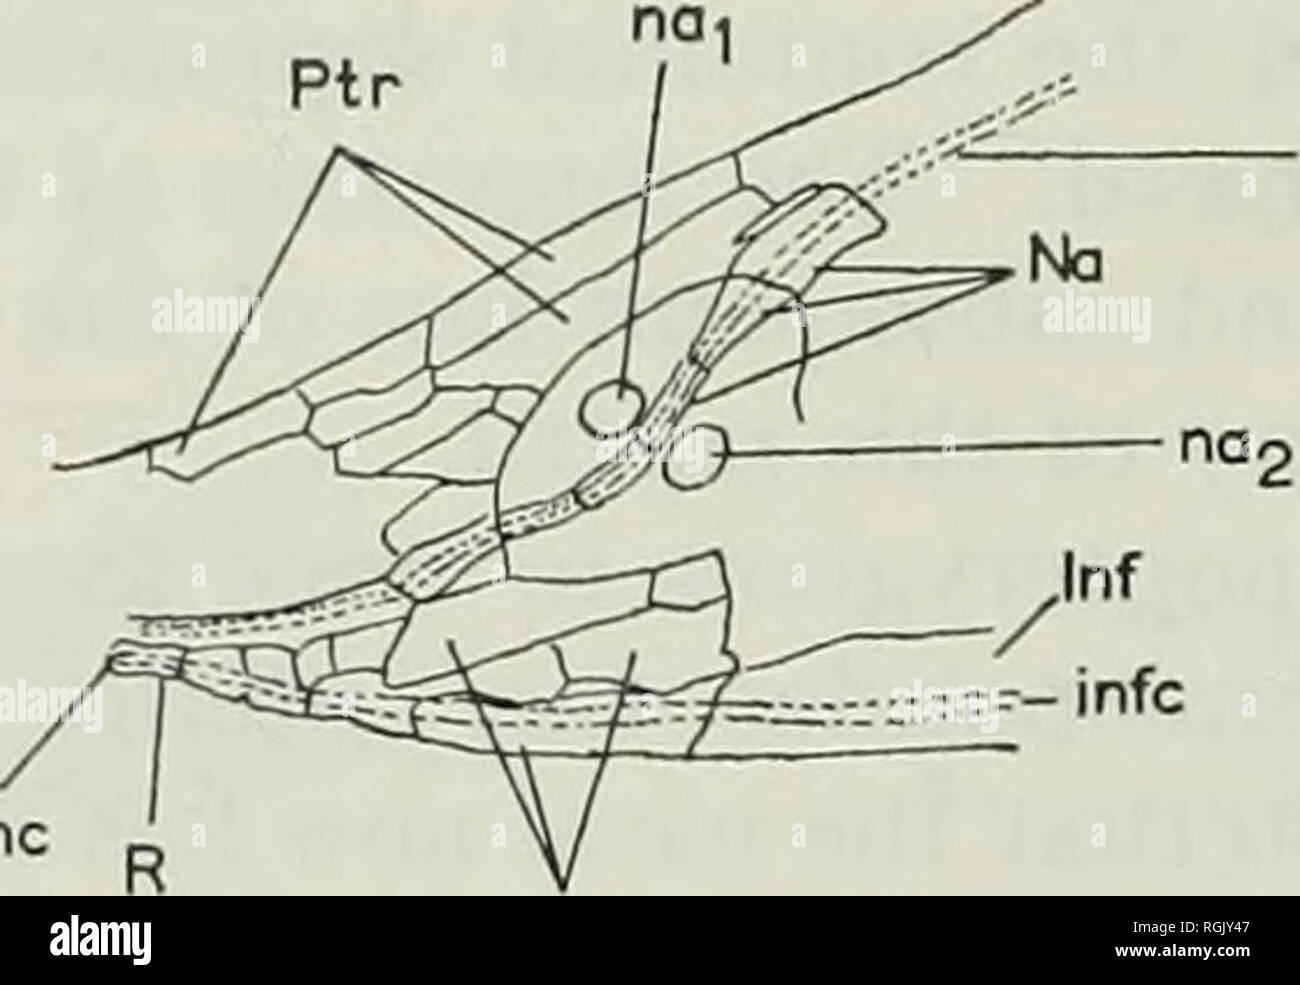 . Bulletin of the British Museum (Natural History), Geology. 3i8 EVOLUTION OF THE SNOUT IN ACTINOPTERYGIANS Finally, anastomosis of the infraorbital sensory canal with the supraorbital canal can take place at a later stage if the two components lie close enough together. This has occurred in the Recent Polypterus senegalus (Text-fig. 20D) and in the Recent Lepisosteus osseus (Text-fig. 19M), while a similar condition is observable in Paraccntrophorus madagascariensis (Text-fig. 19G) from the Lower Triassic. ethc. Ant ethc. Please note that these images are extracted from scanned page images th Stock Photo